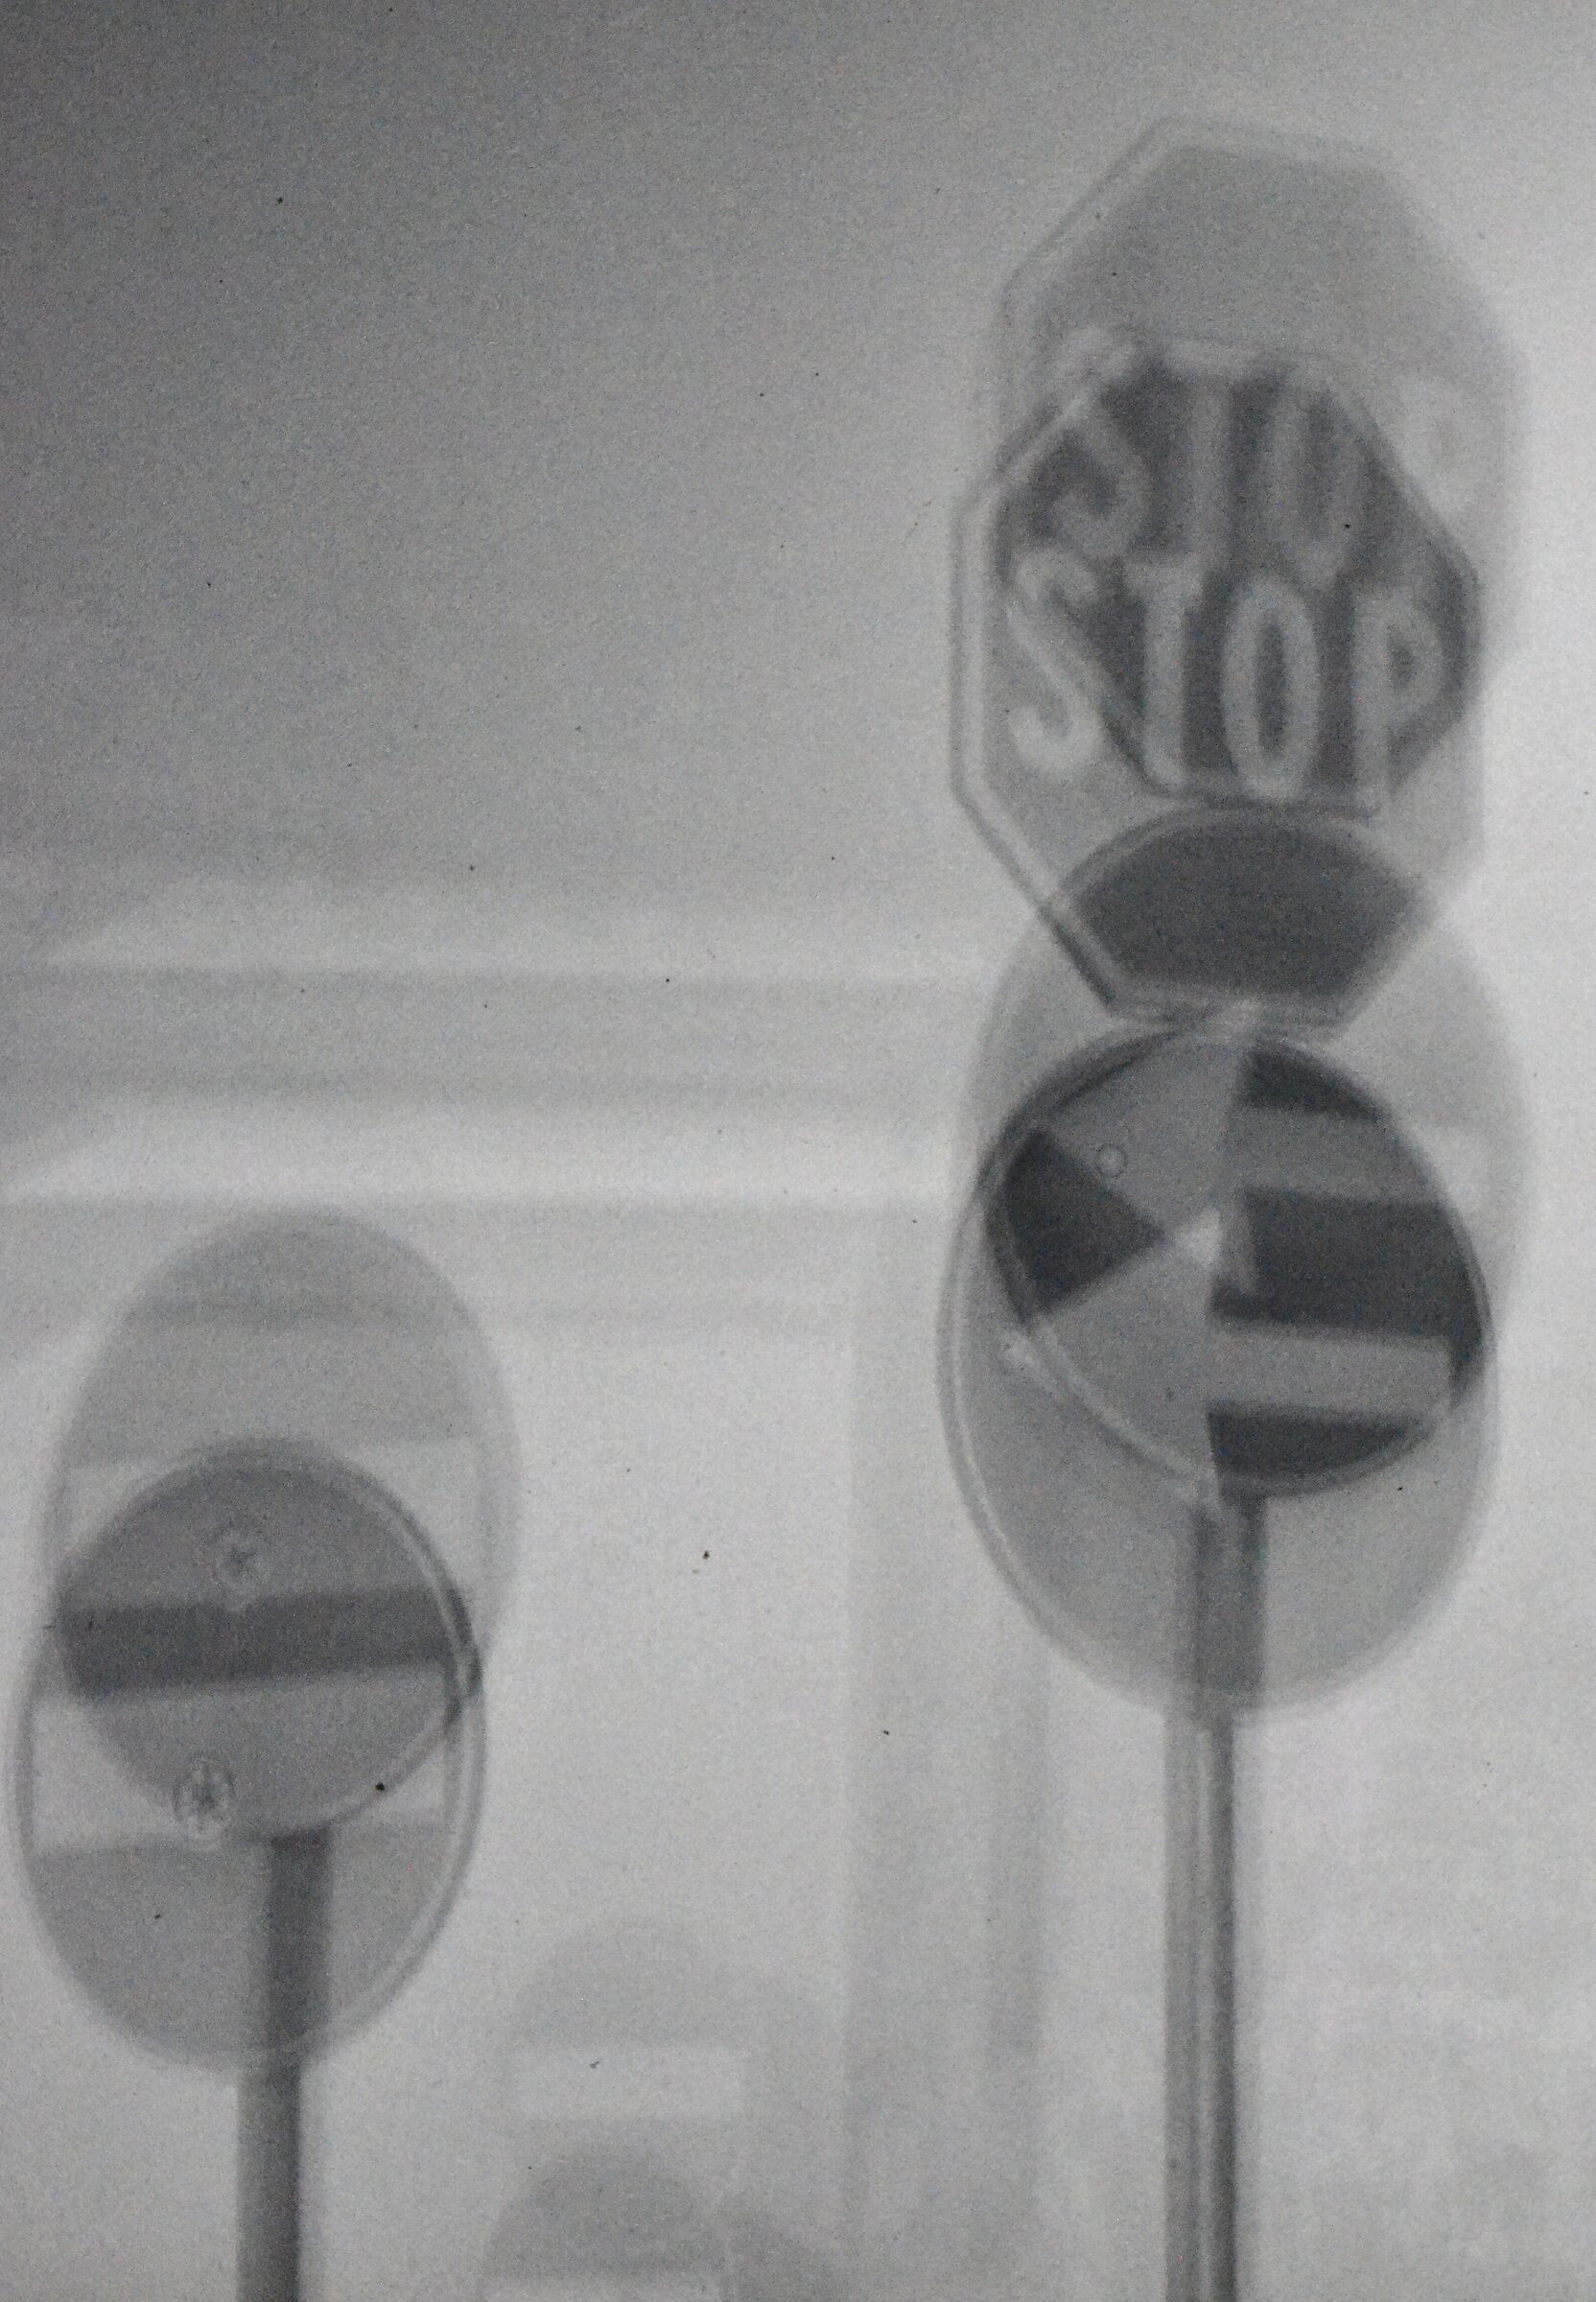 Road signs in double exposure...